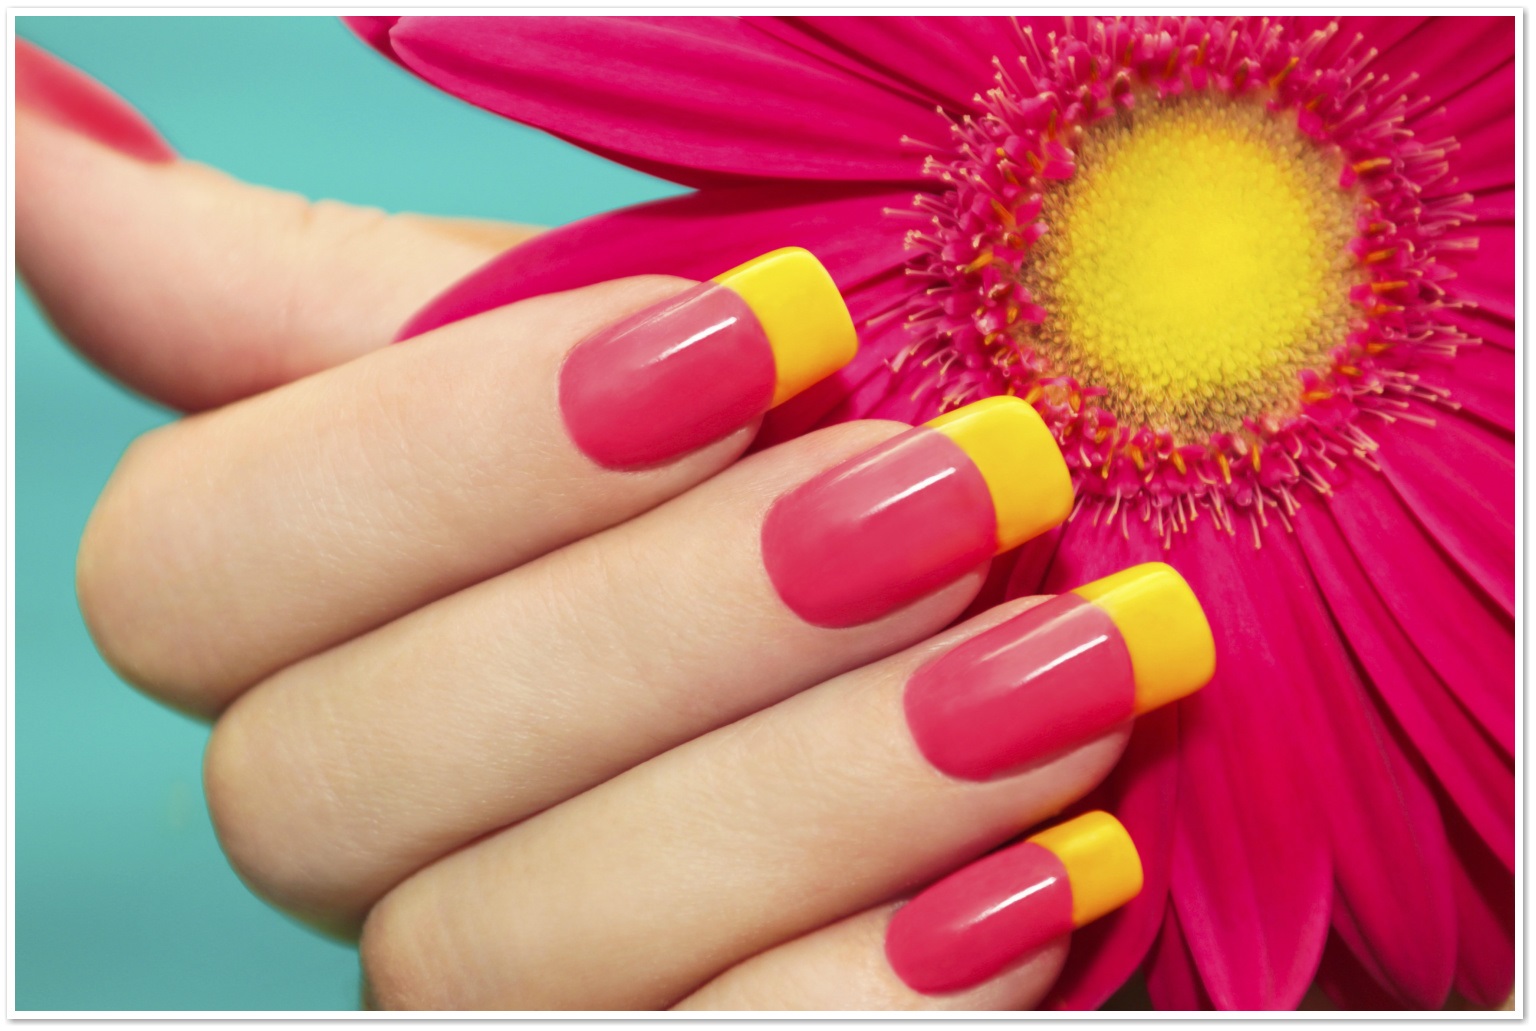 NAIL ART IN CHANDIGARH Tips on How to Paint Your Nails